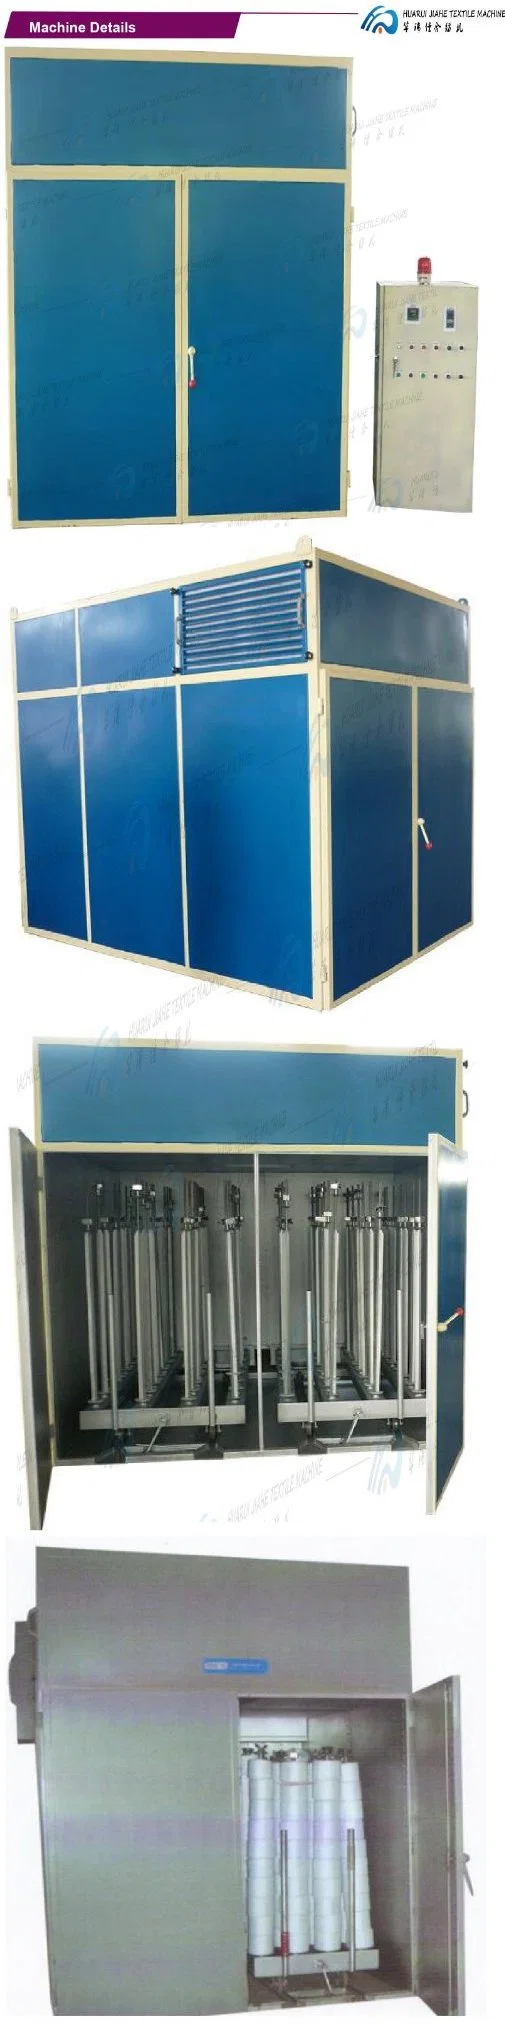 Finished Cloth Dyeing Machine for Garment Professional Energy Saving Hot Air Yarn Drying Machine 60Hz Fabric and Yarn Dyeing Drying Machine for Samples